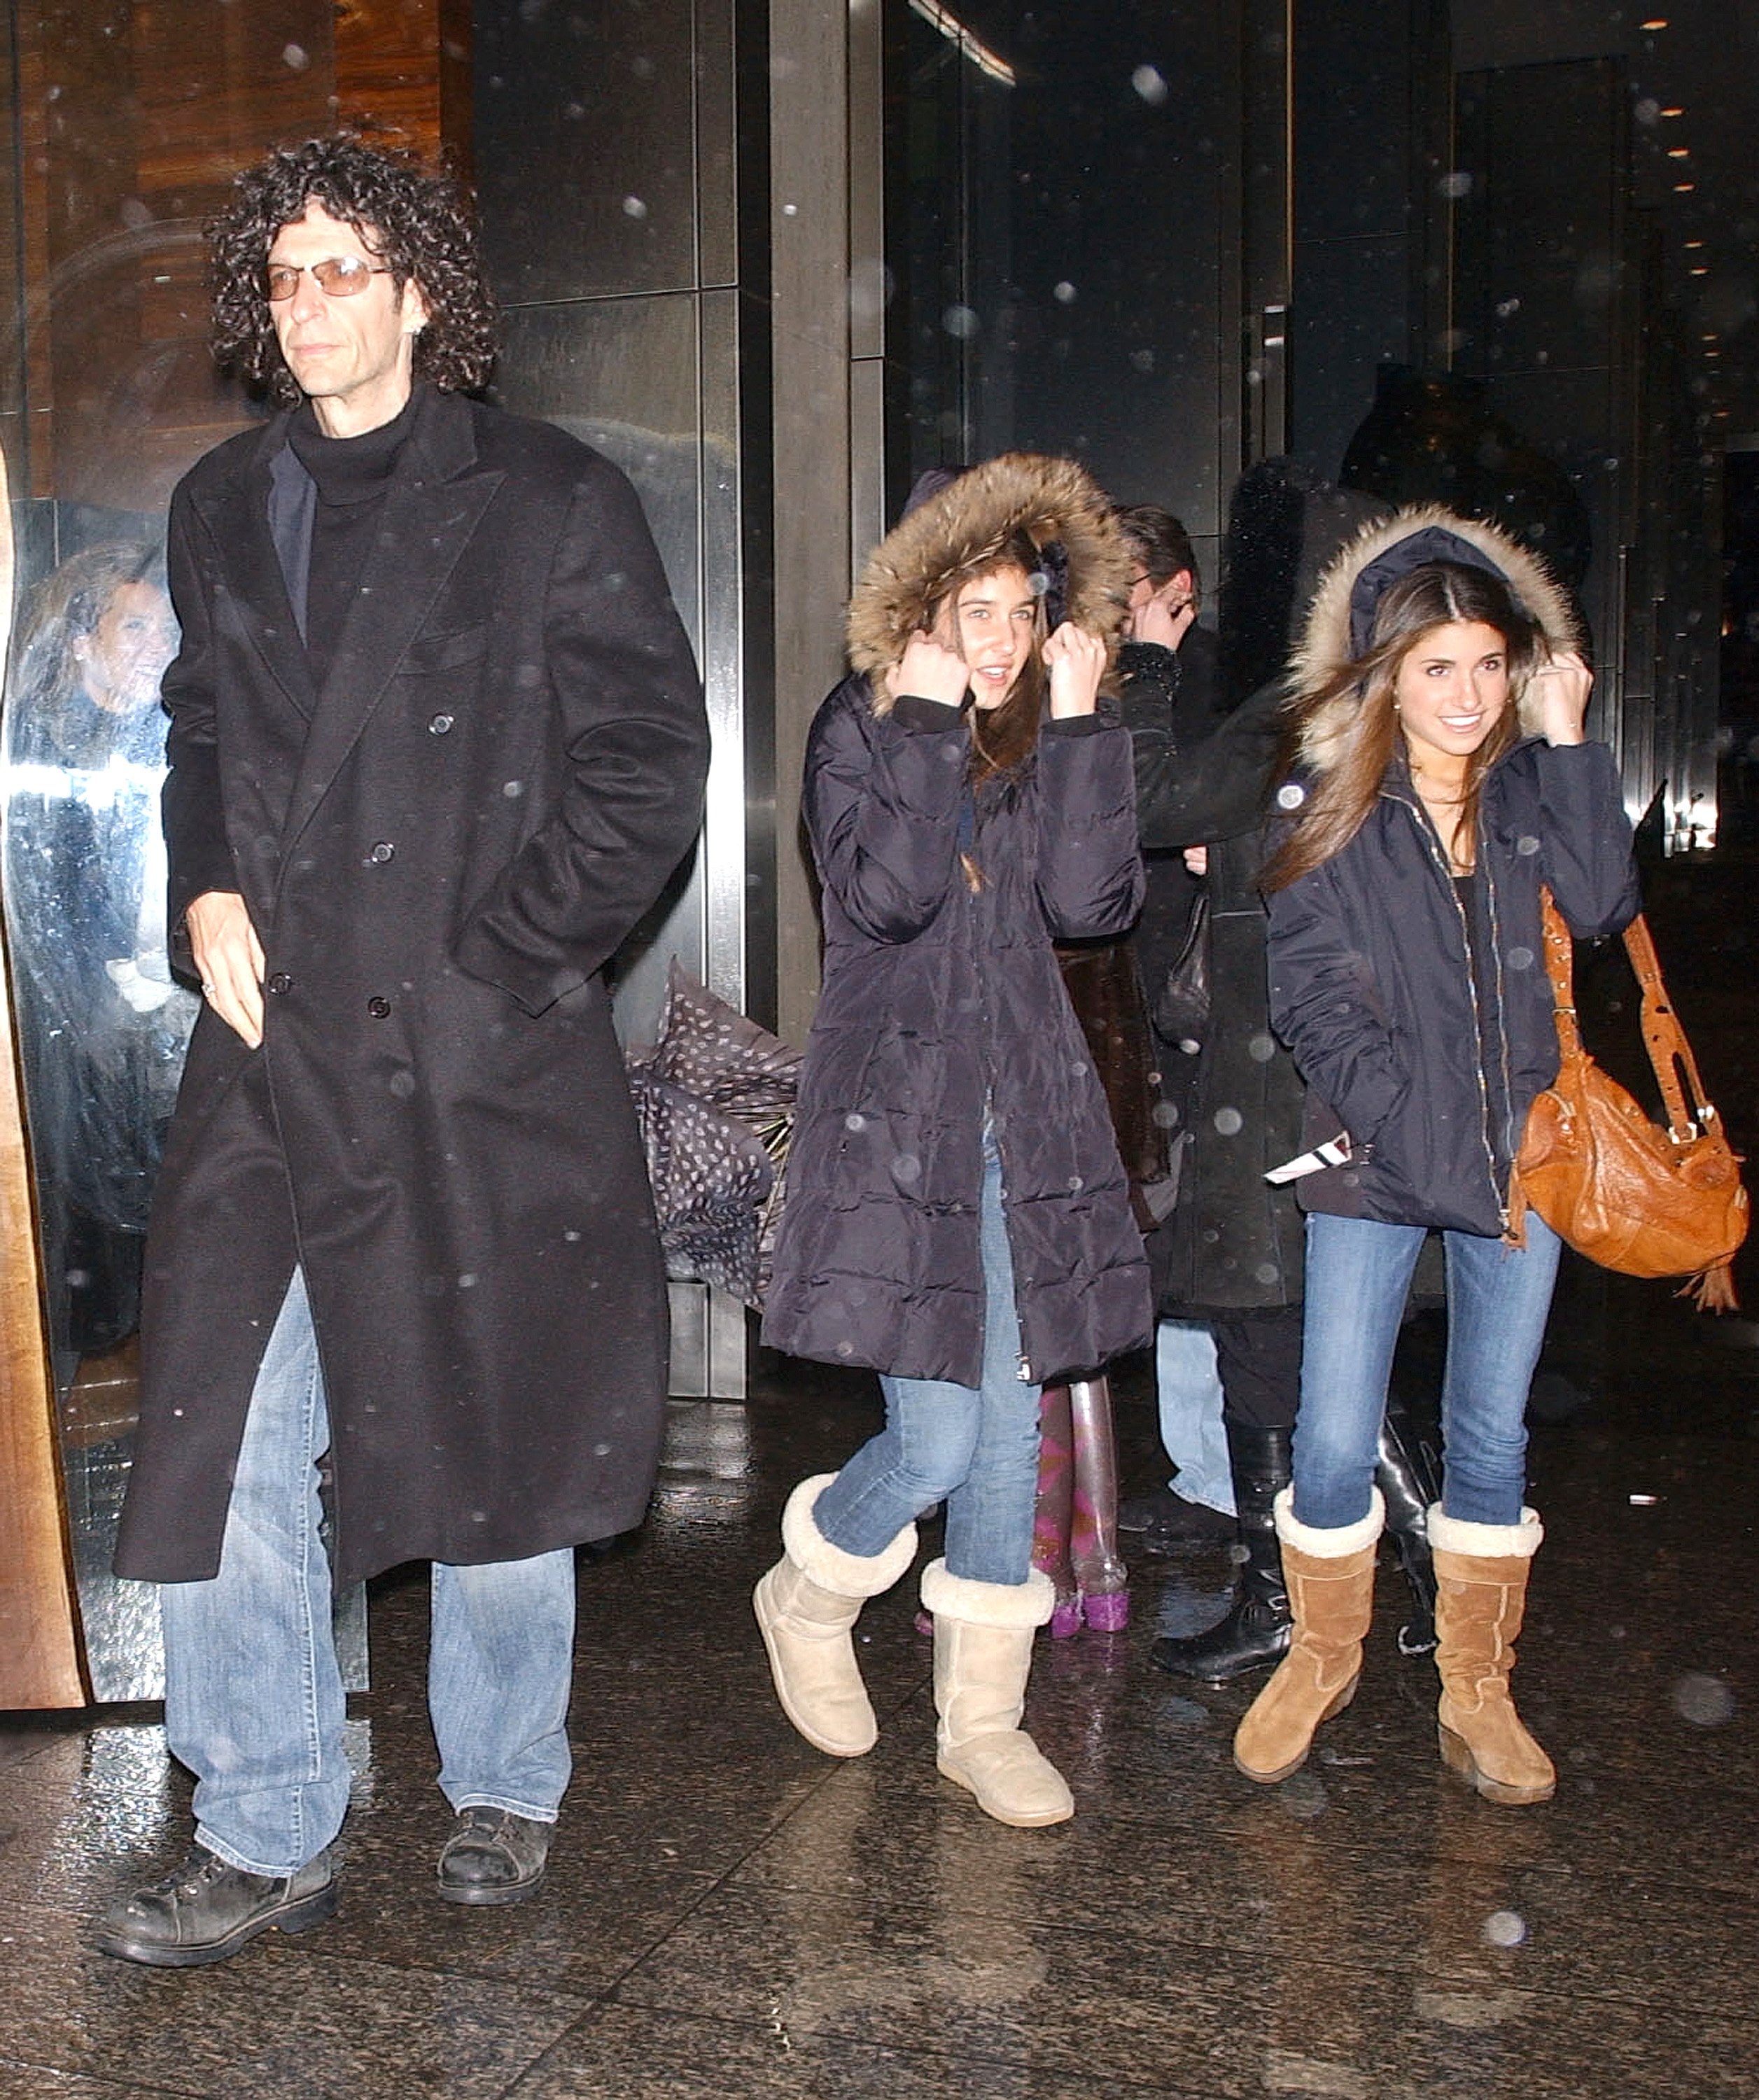 Howard Stern with his daughters Debra and Ashley leaving a restaurant in Midtown, New York City, on March 16, 2007. | Source: Getty Images